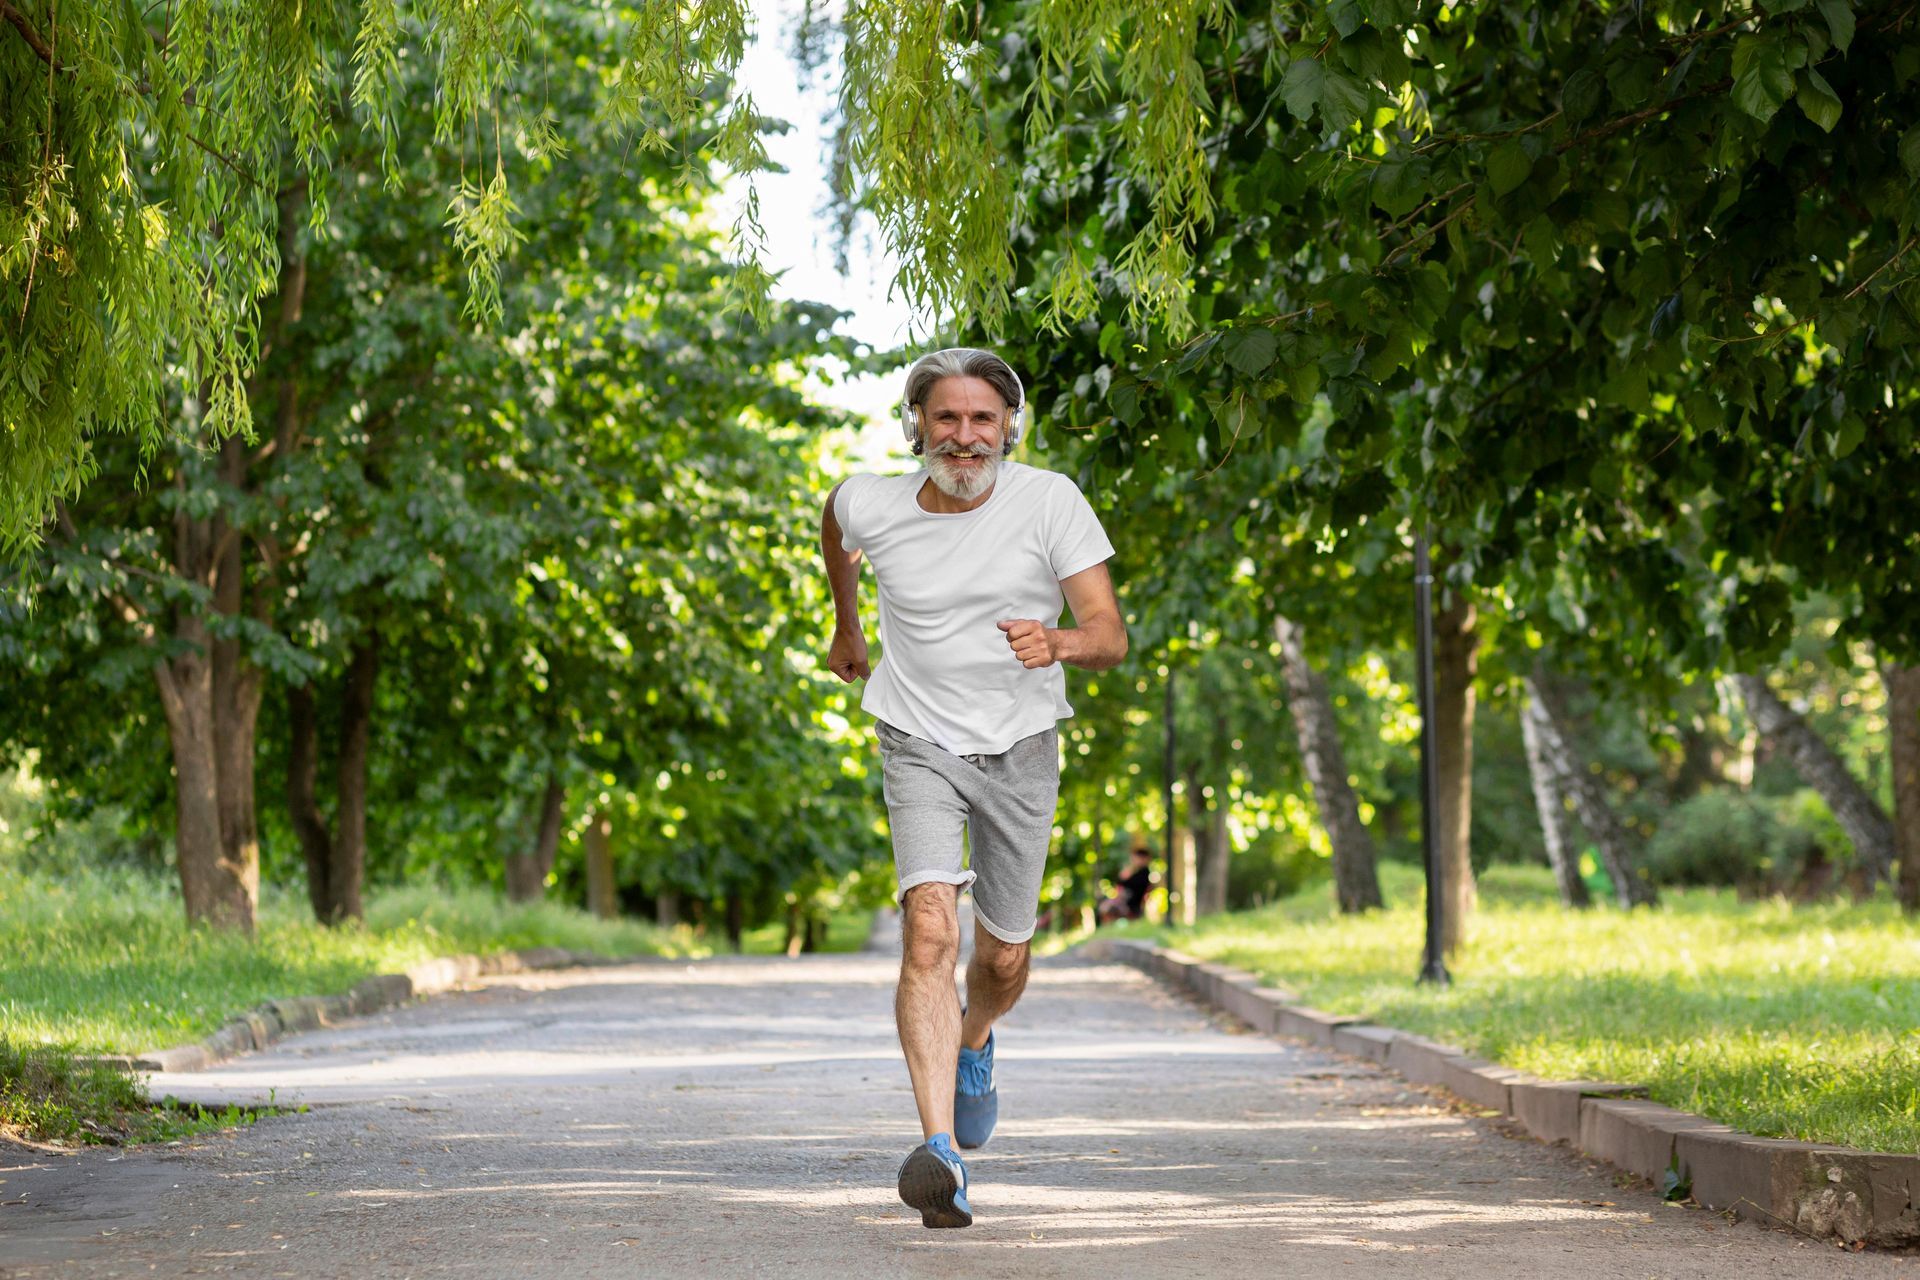 An elderly man is running on a path in a park.